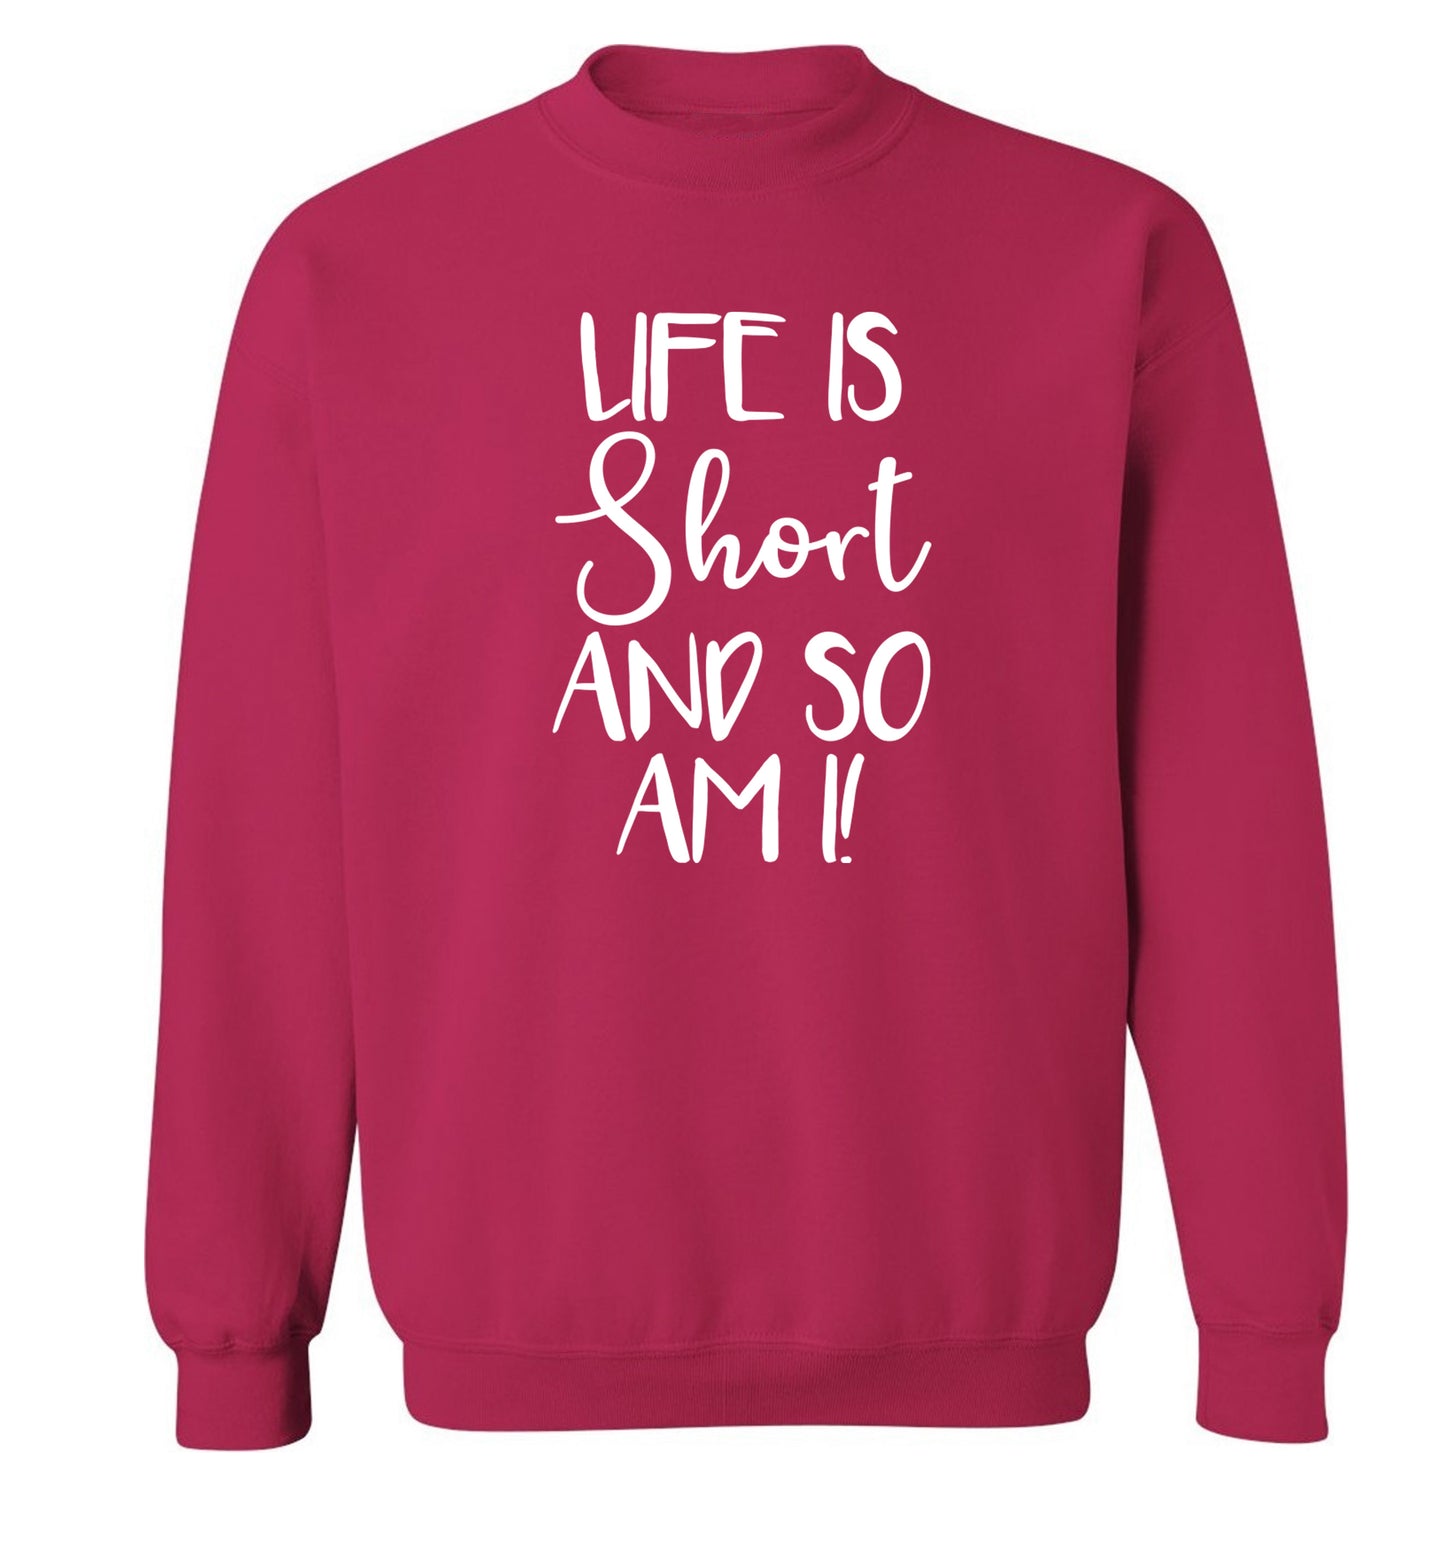 Life is short and so am I! Adult's unisex pink Sweater 2XL